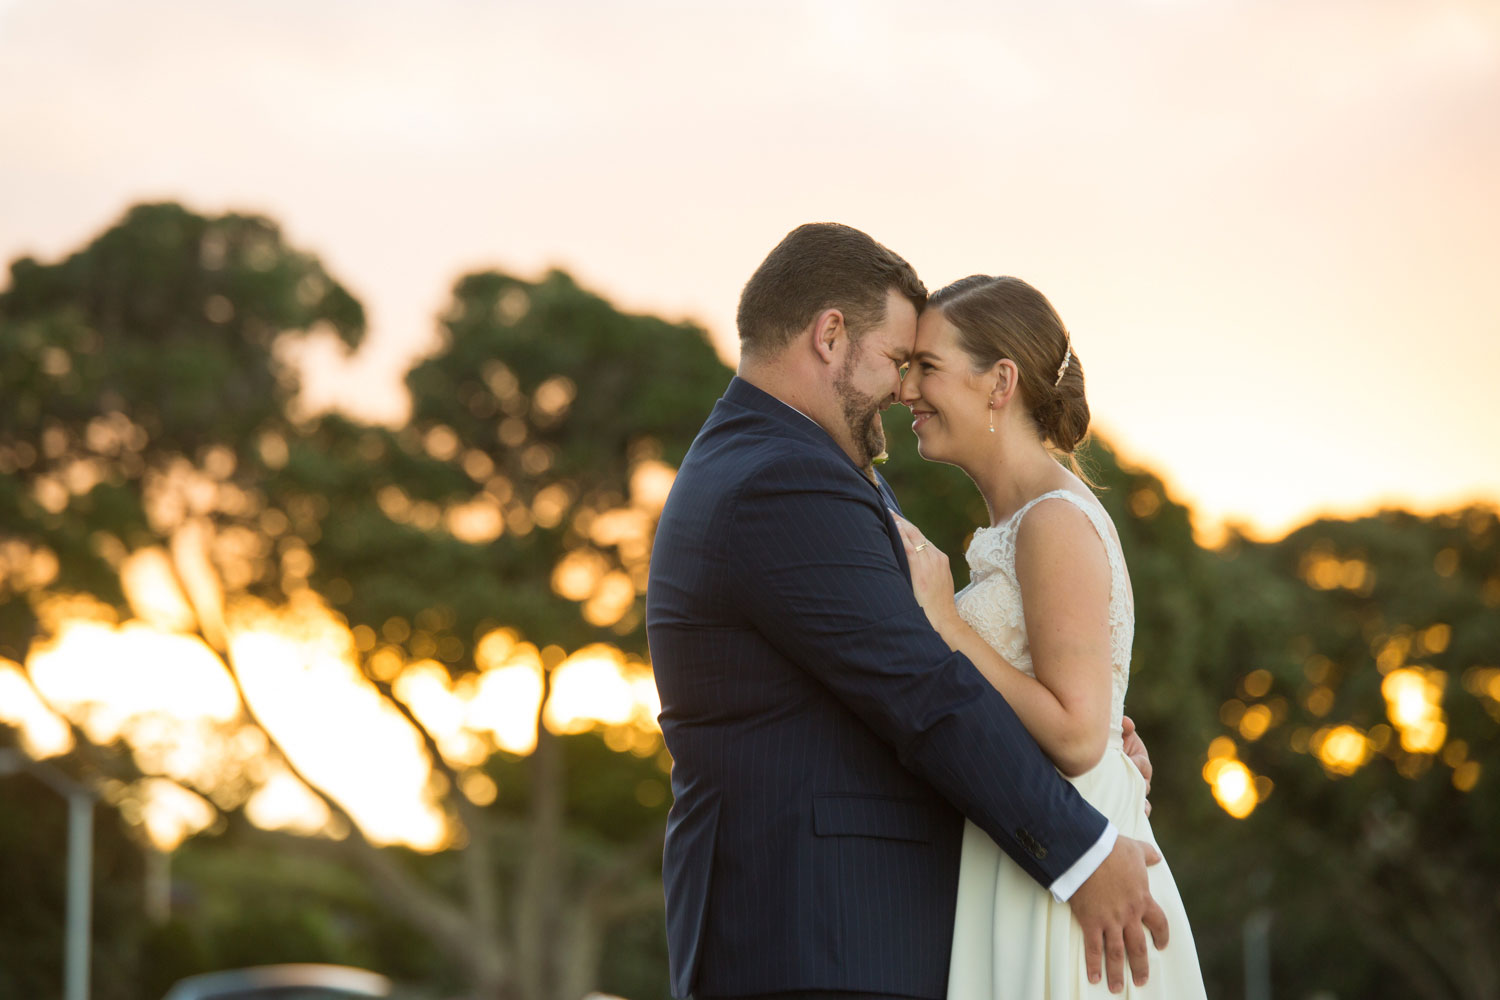 wedding photographer auckland bride and groom together